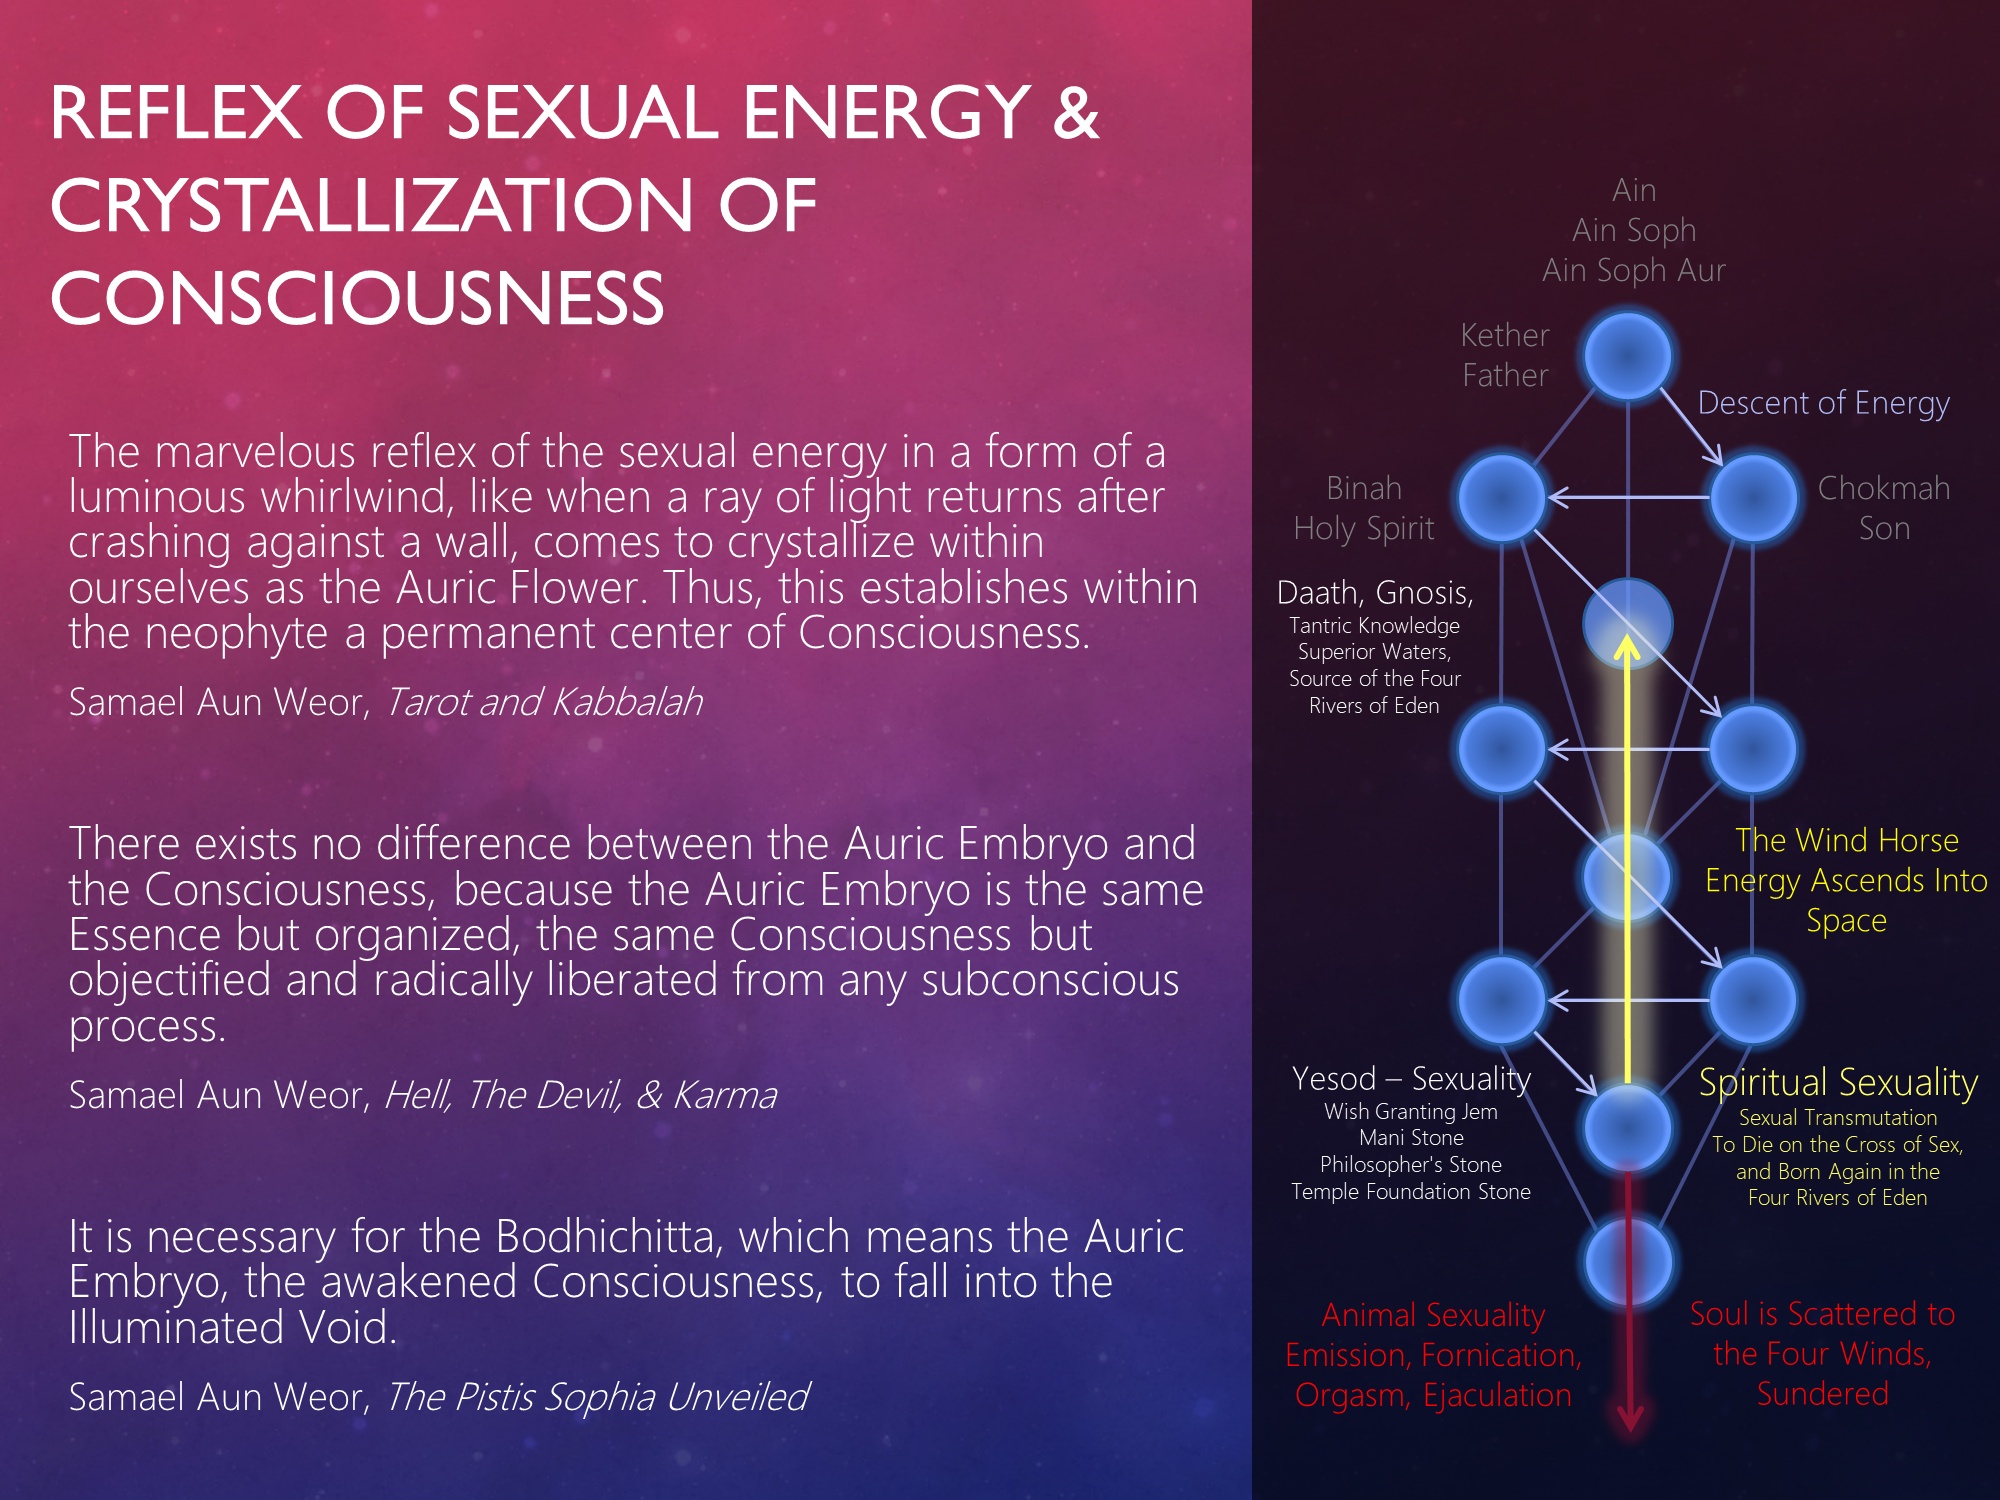 Reflex of Sexual Energy & Crystallization of Consciousness